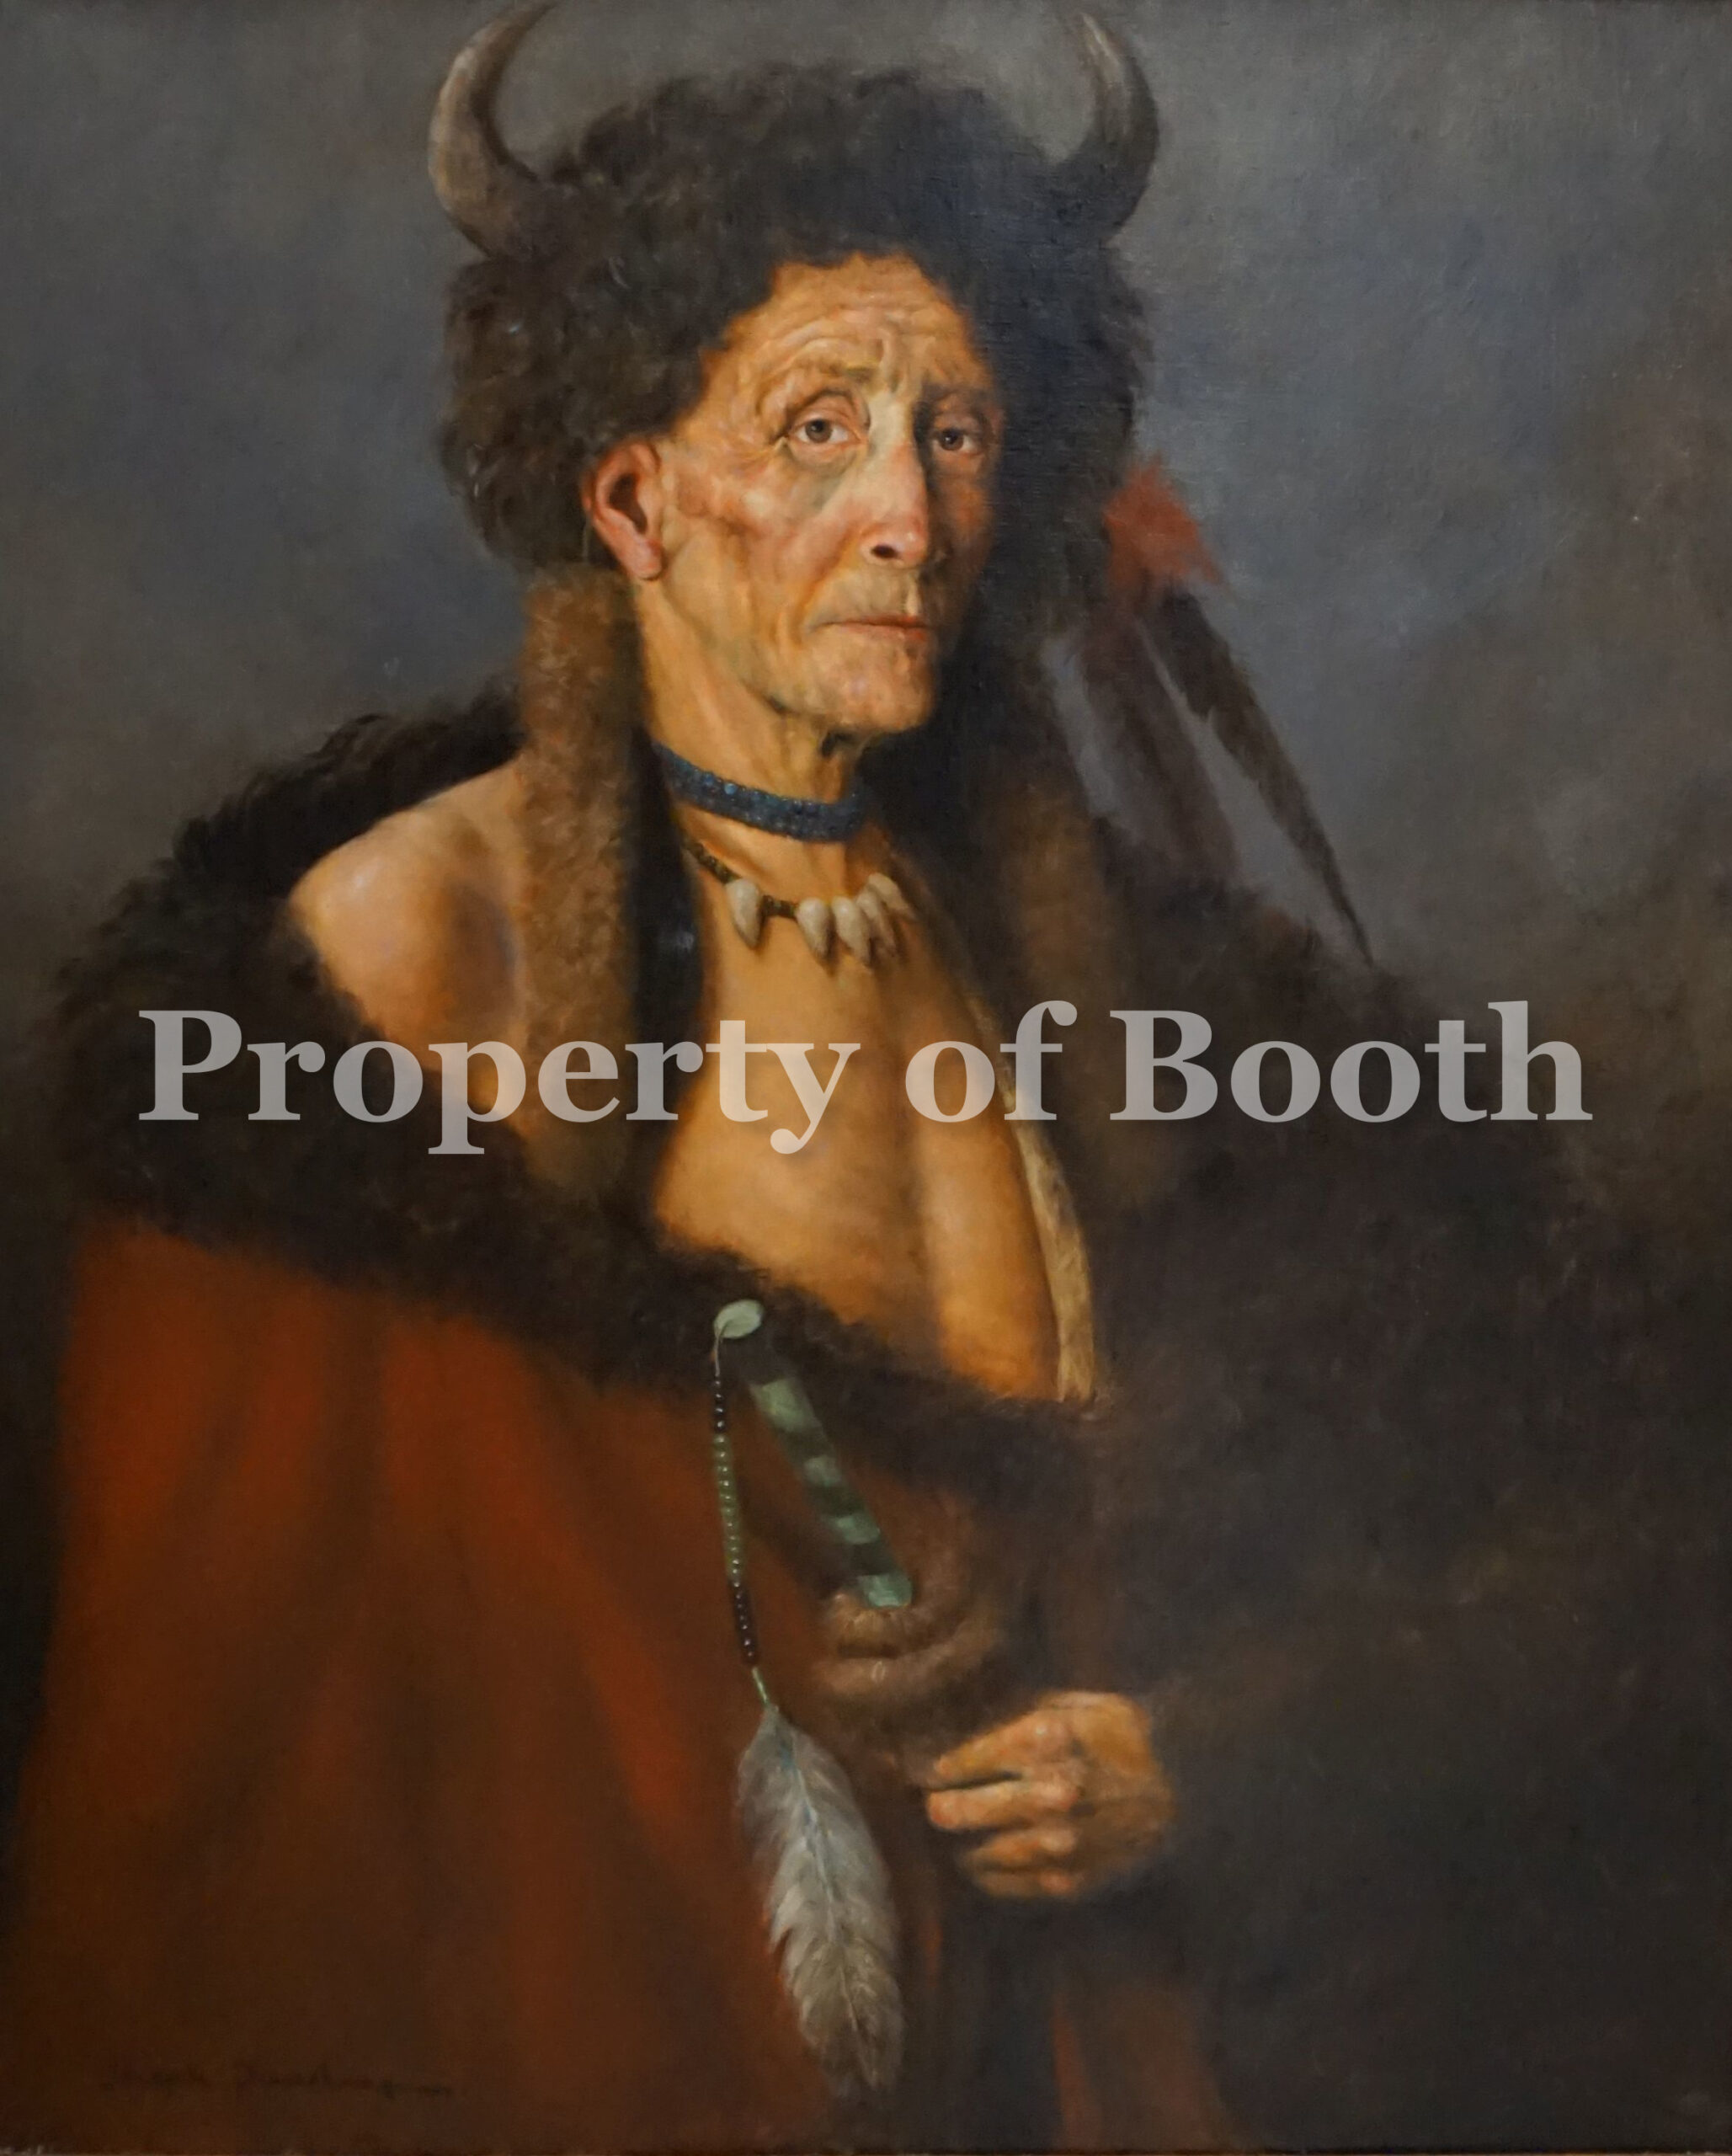 © Joseph Dawle, Indian in Robe, n.d., oil, 35.75 x 29.75", The Frank Harding Collection